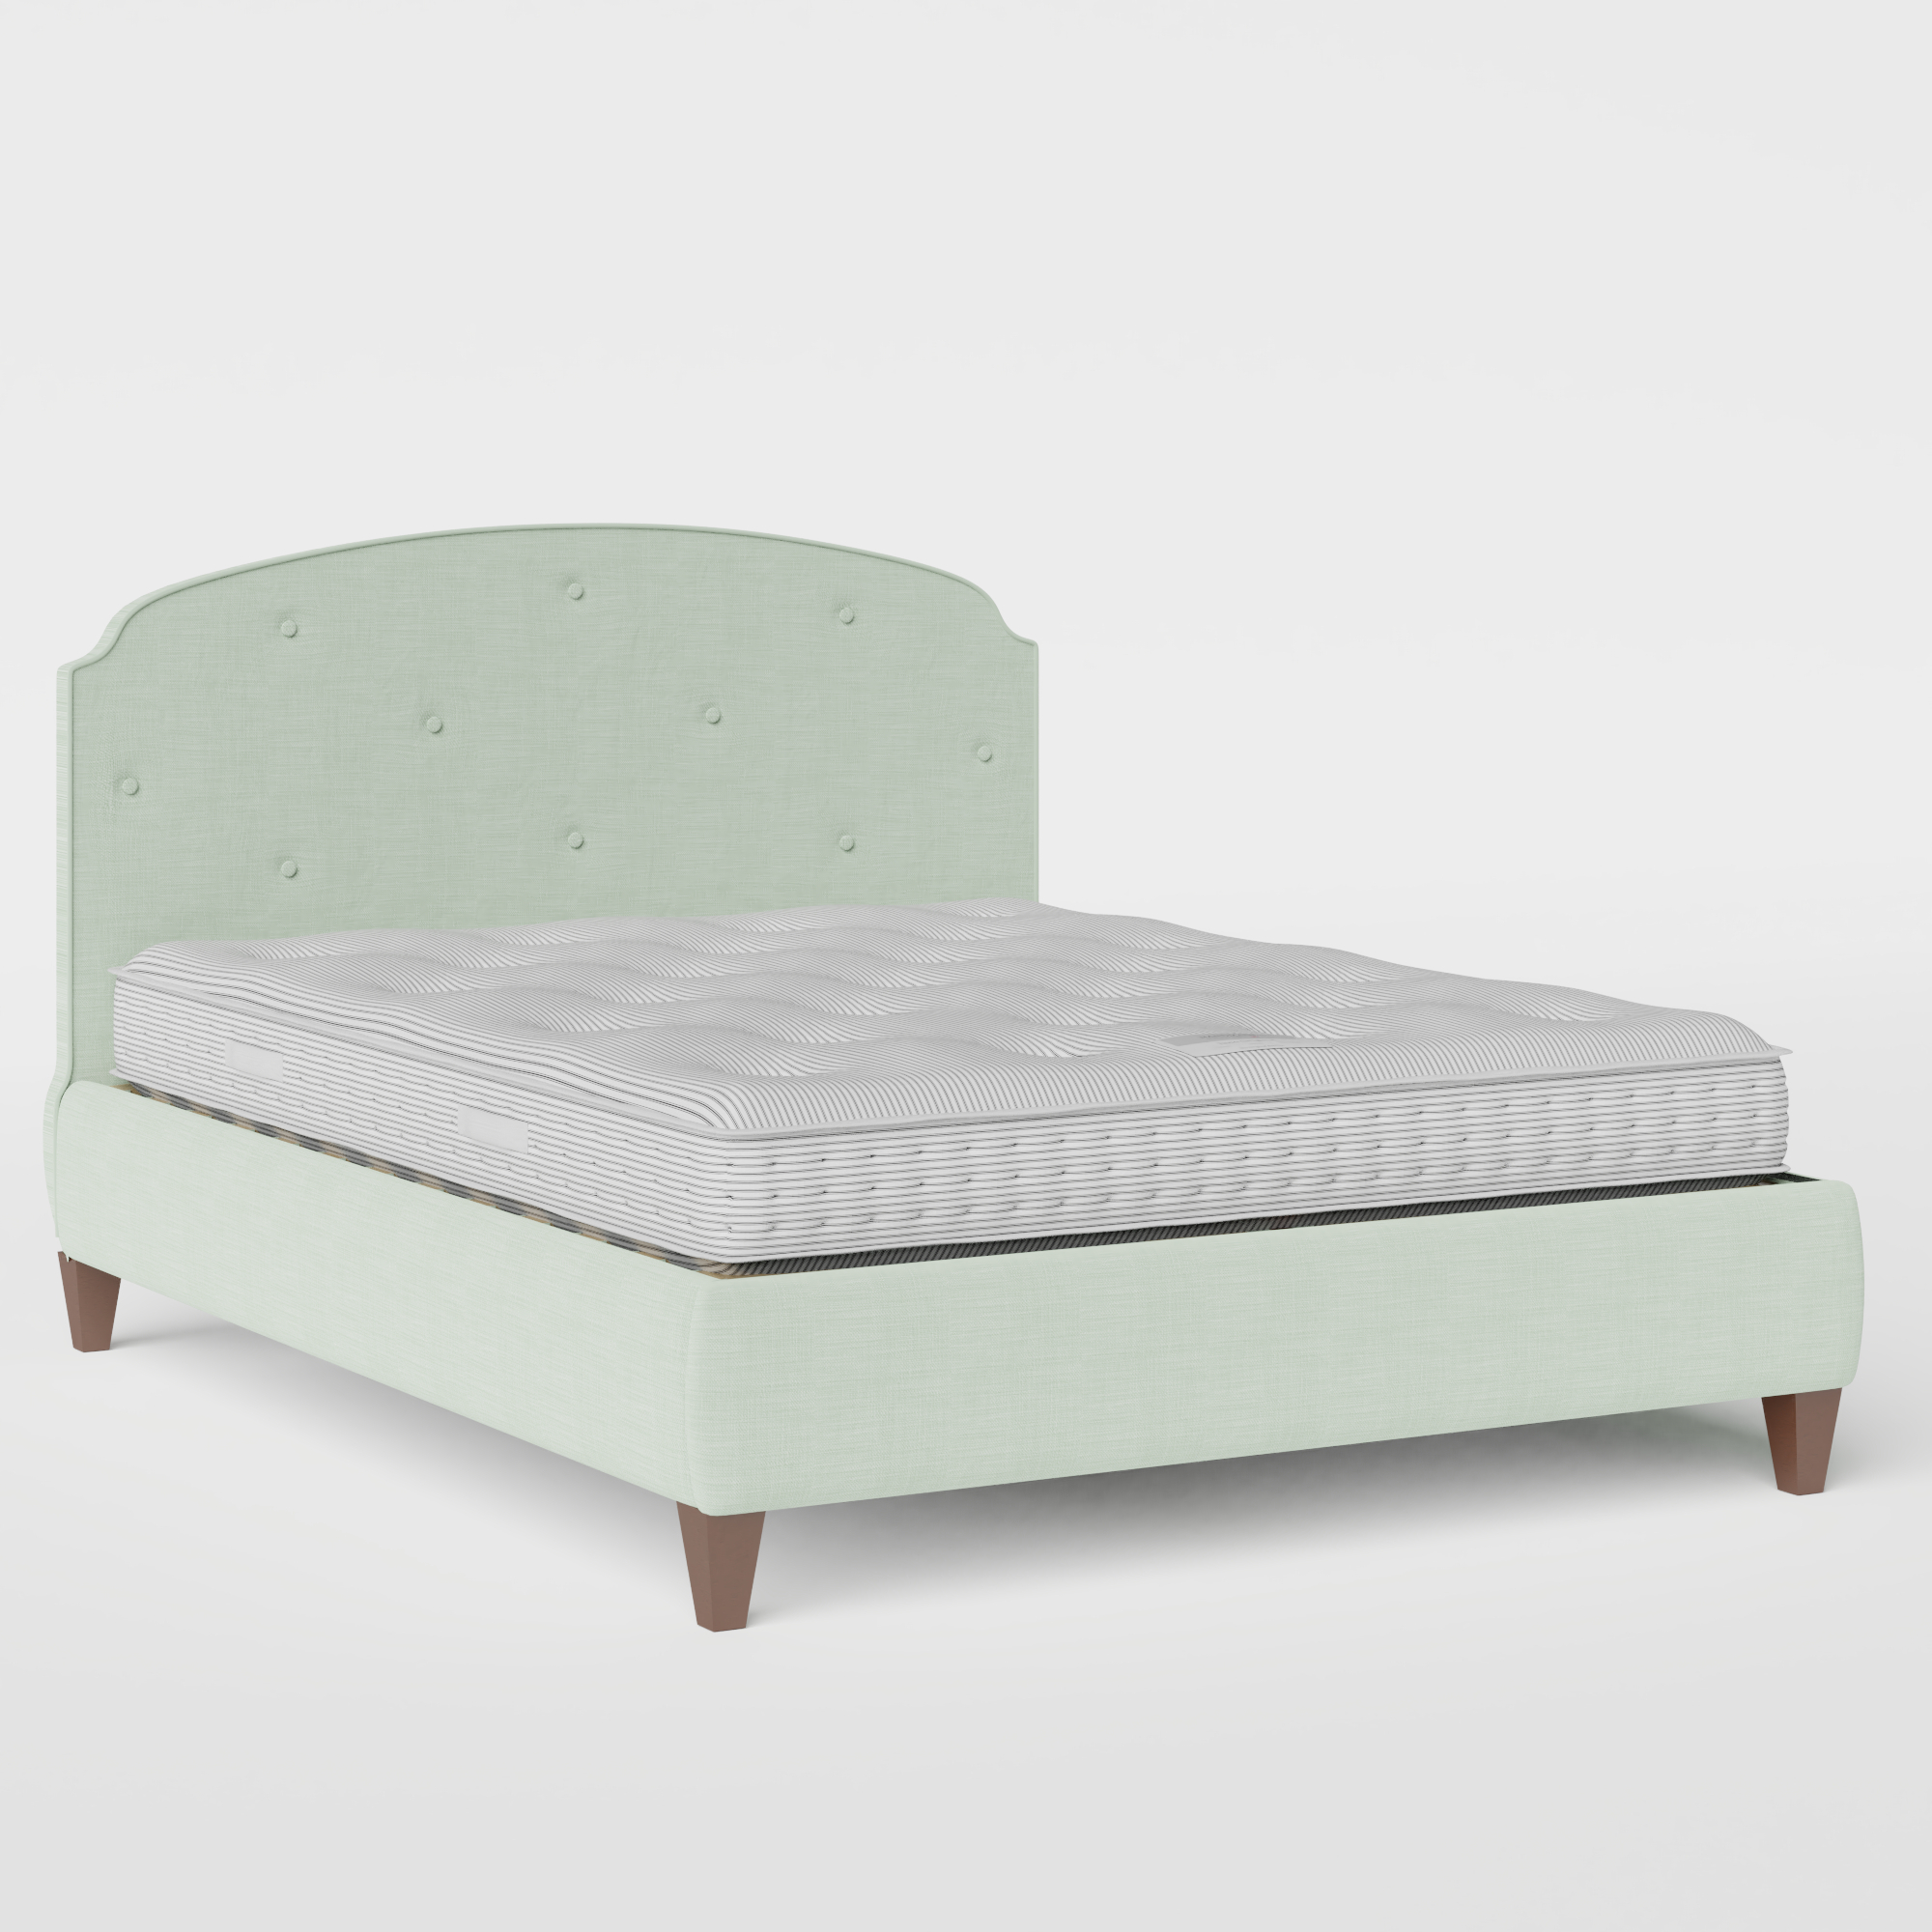 Lide Buttoned Diagonal stoffen bed in duckegg